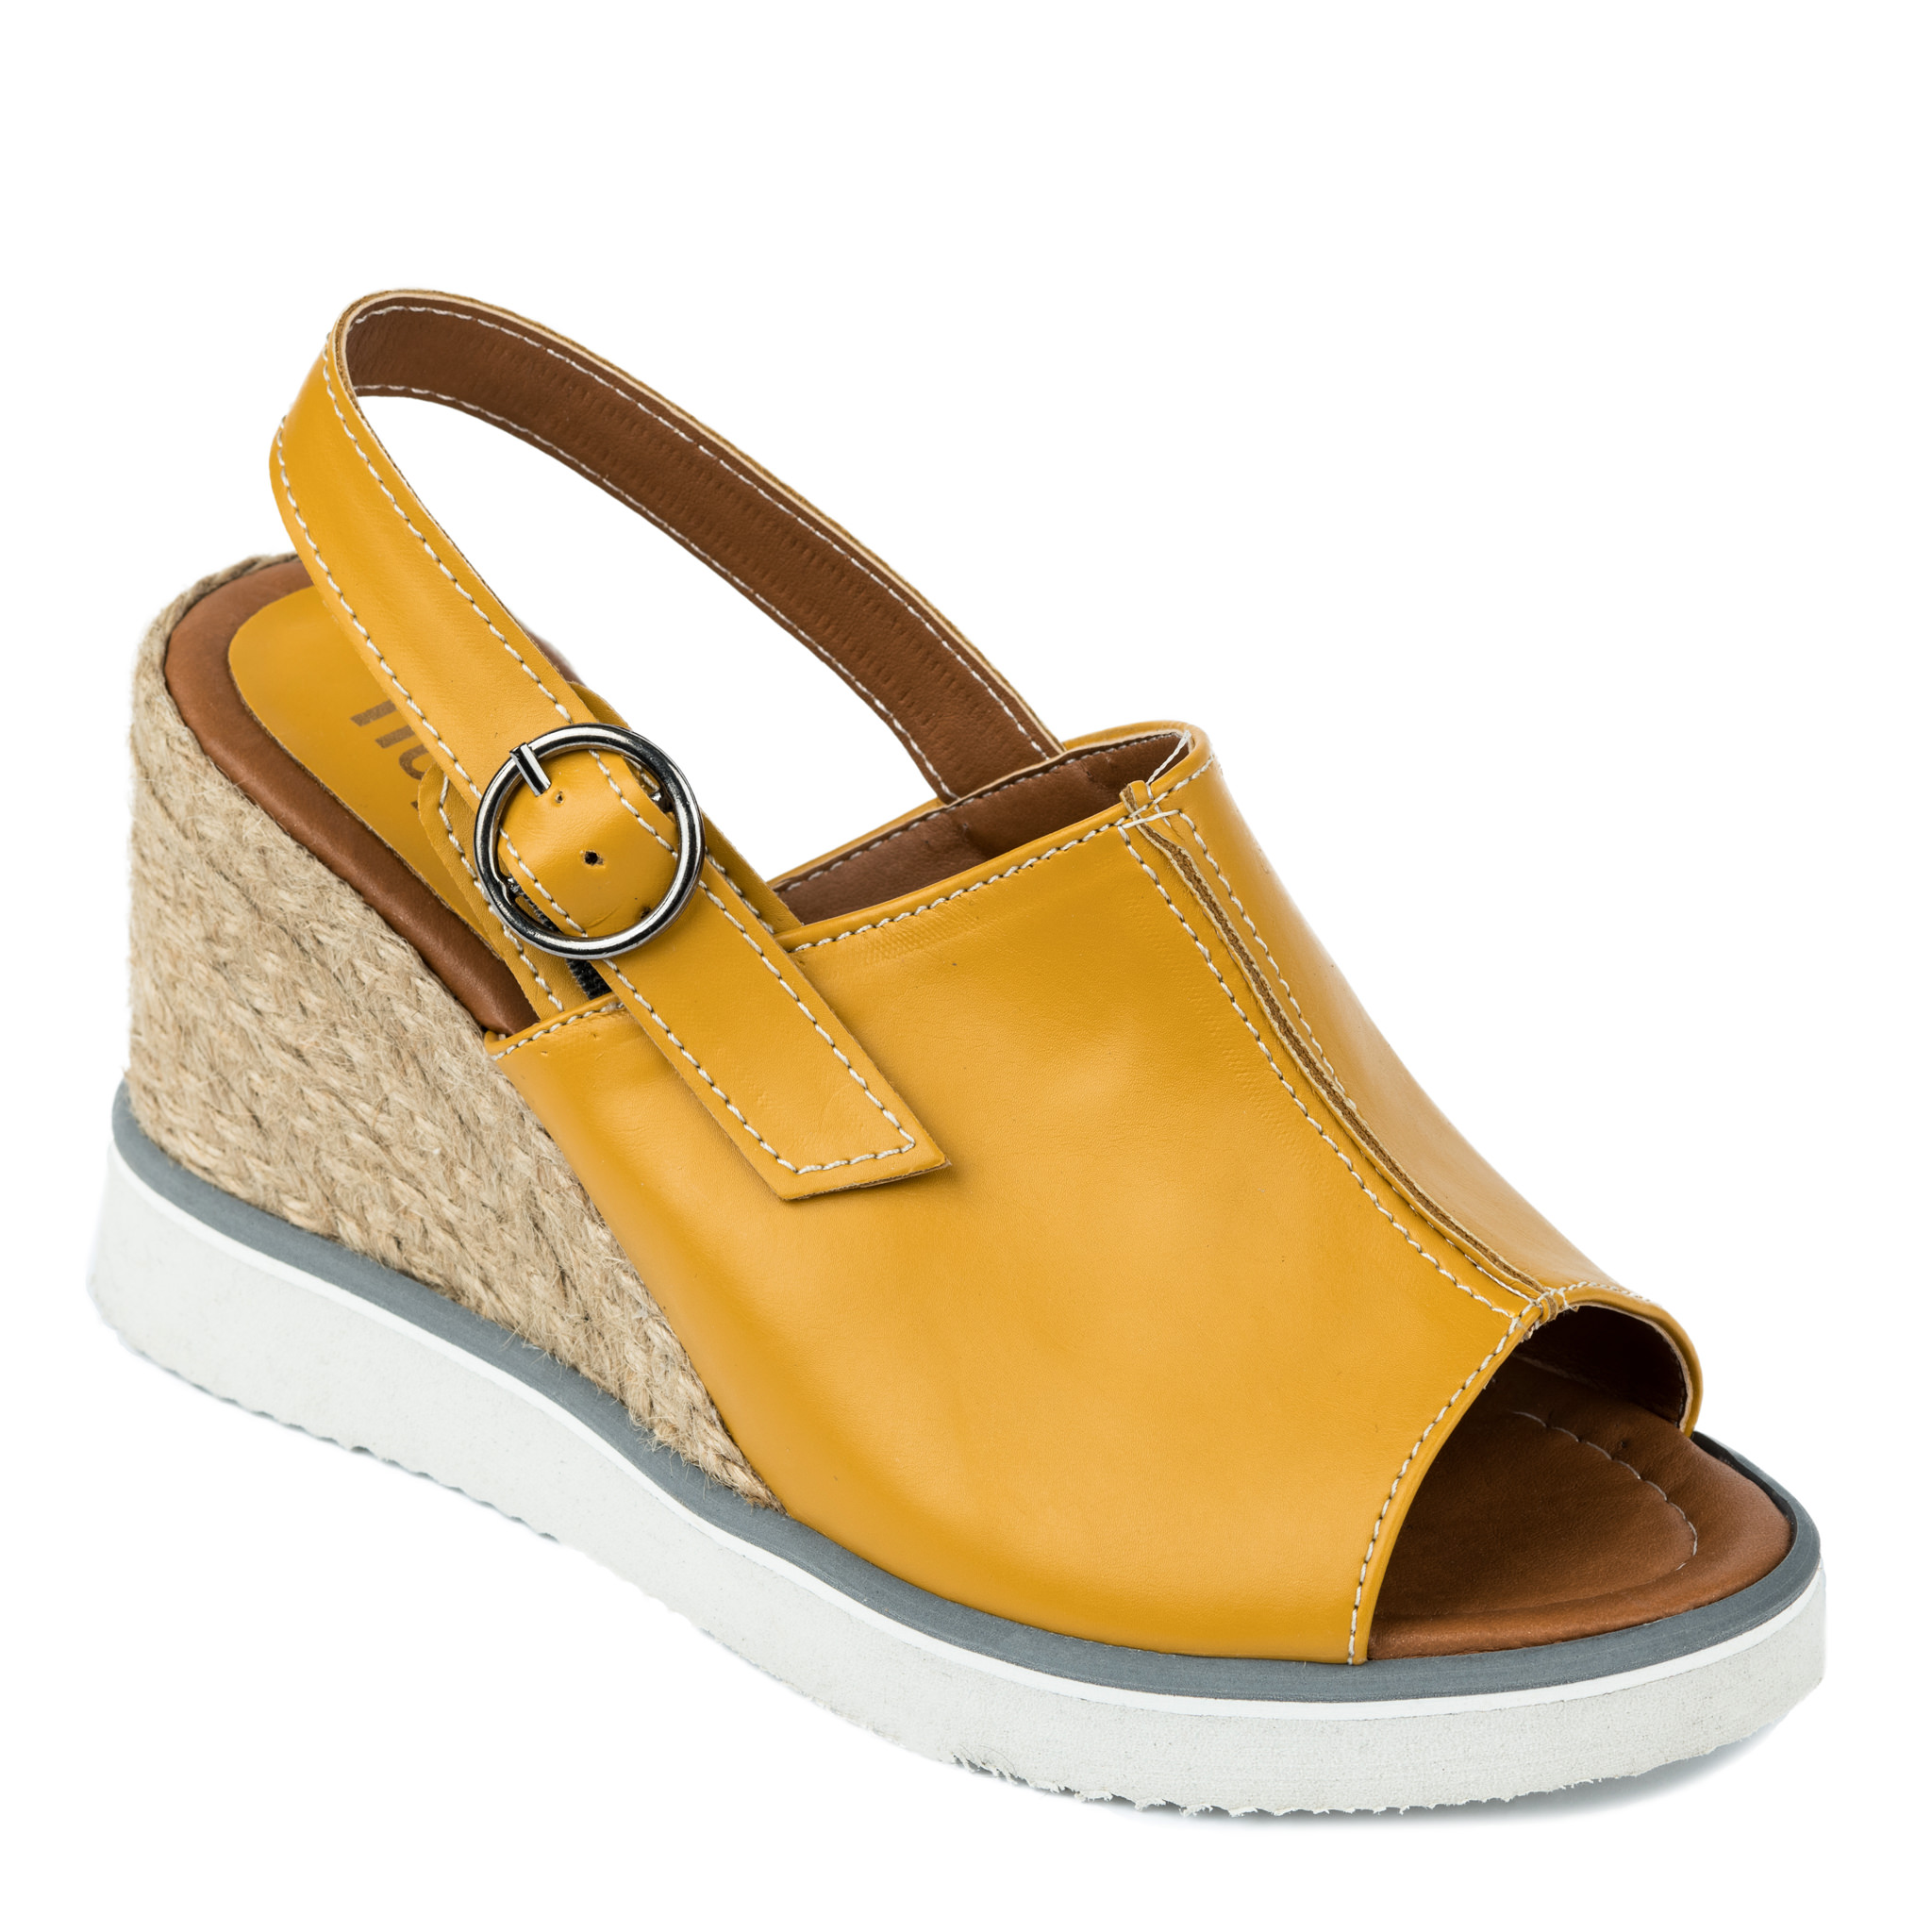 WEDGE SANDALS WITH JUTA AND SAW - OCHER